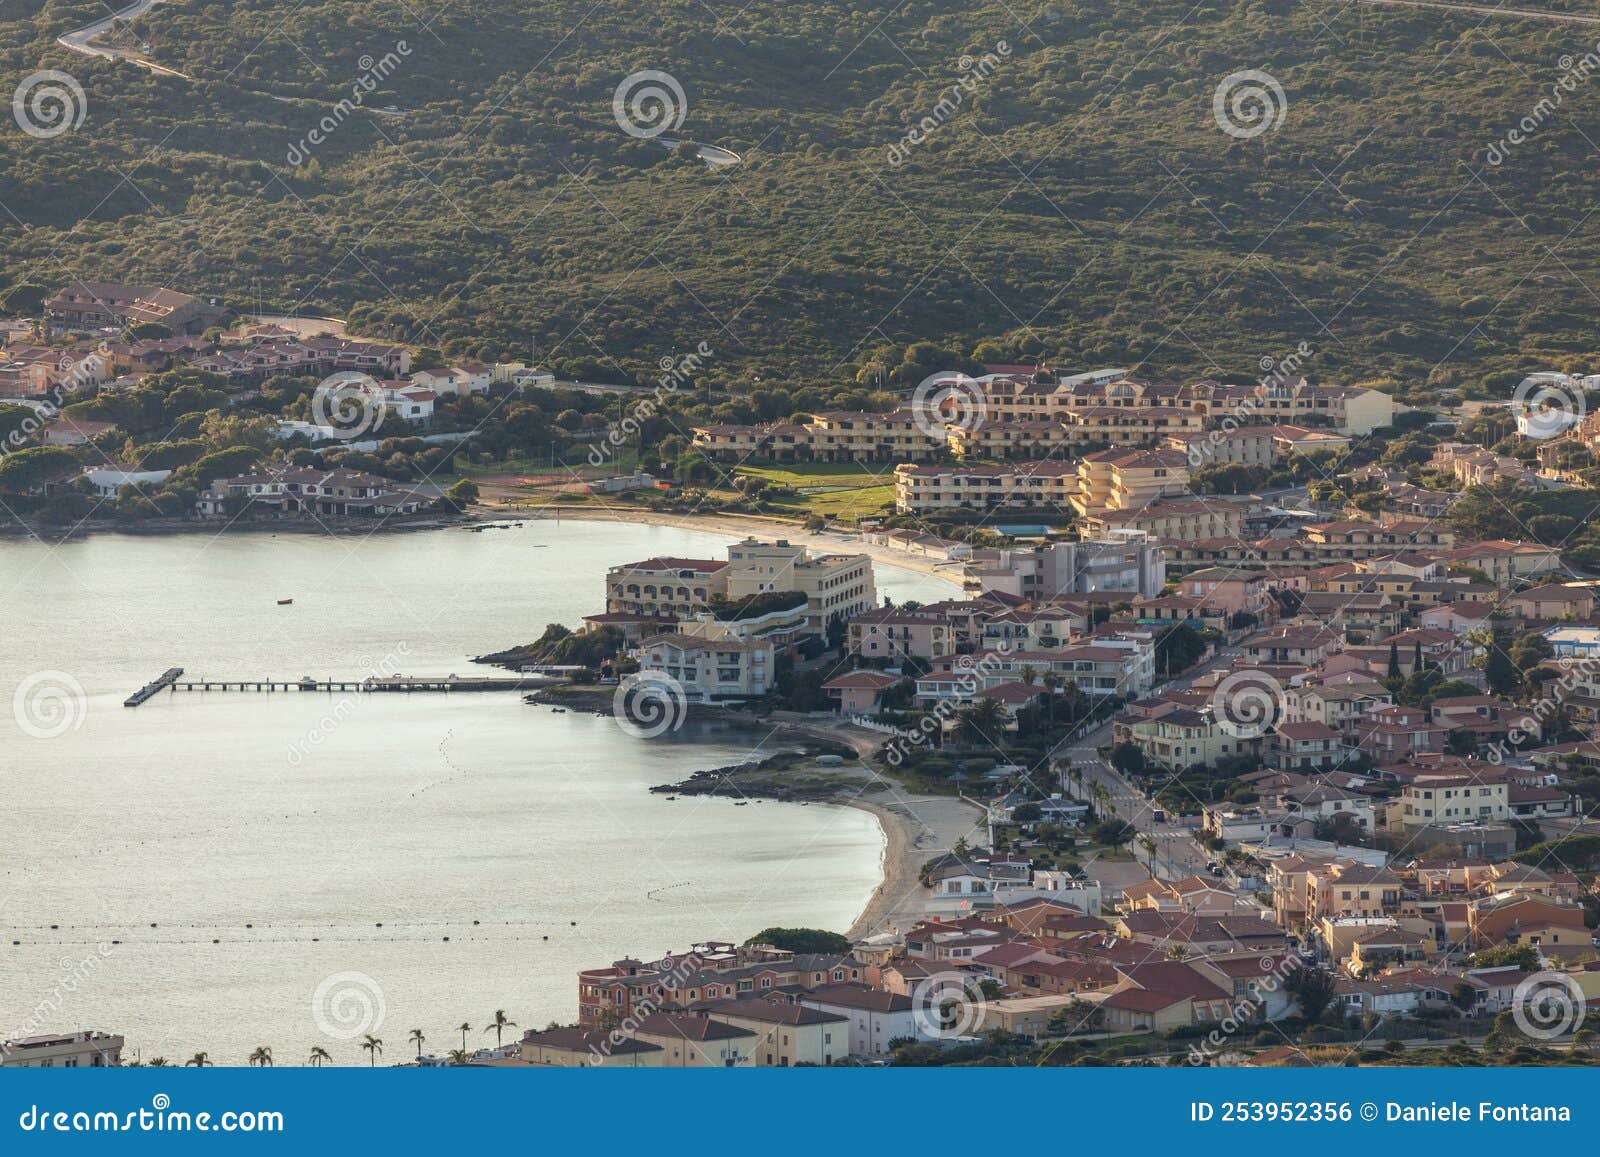 full view of the main beaches in golfo aranci, olbia, with buildings and town view